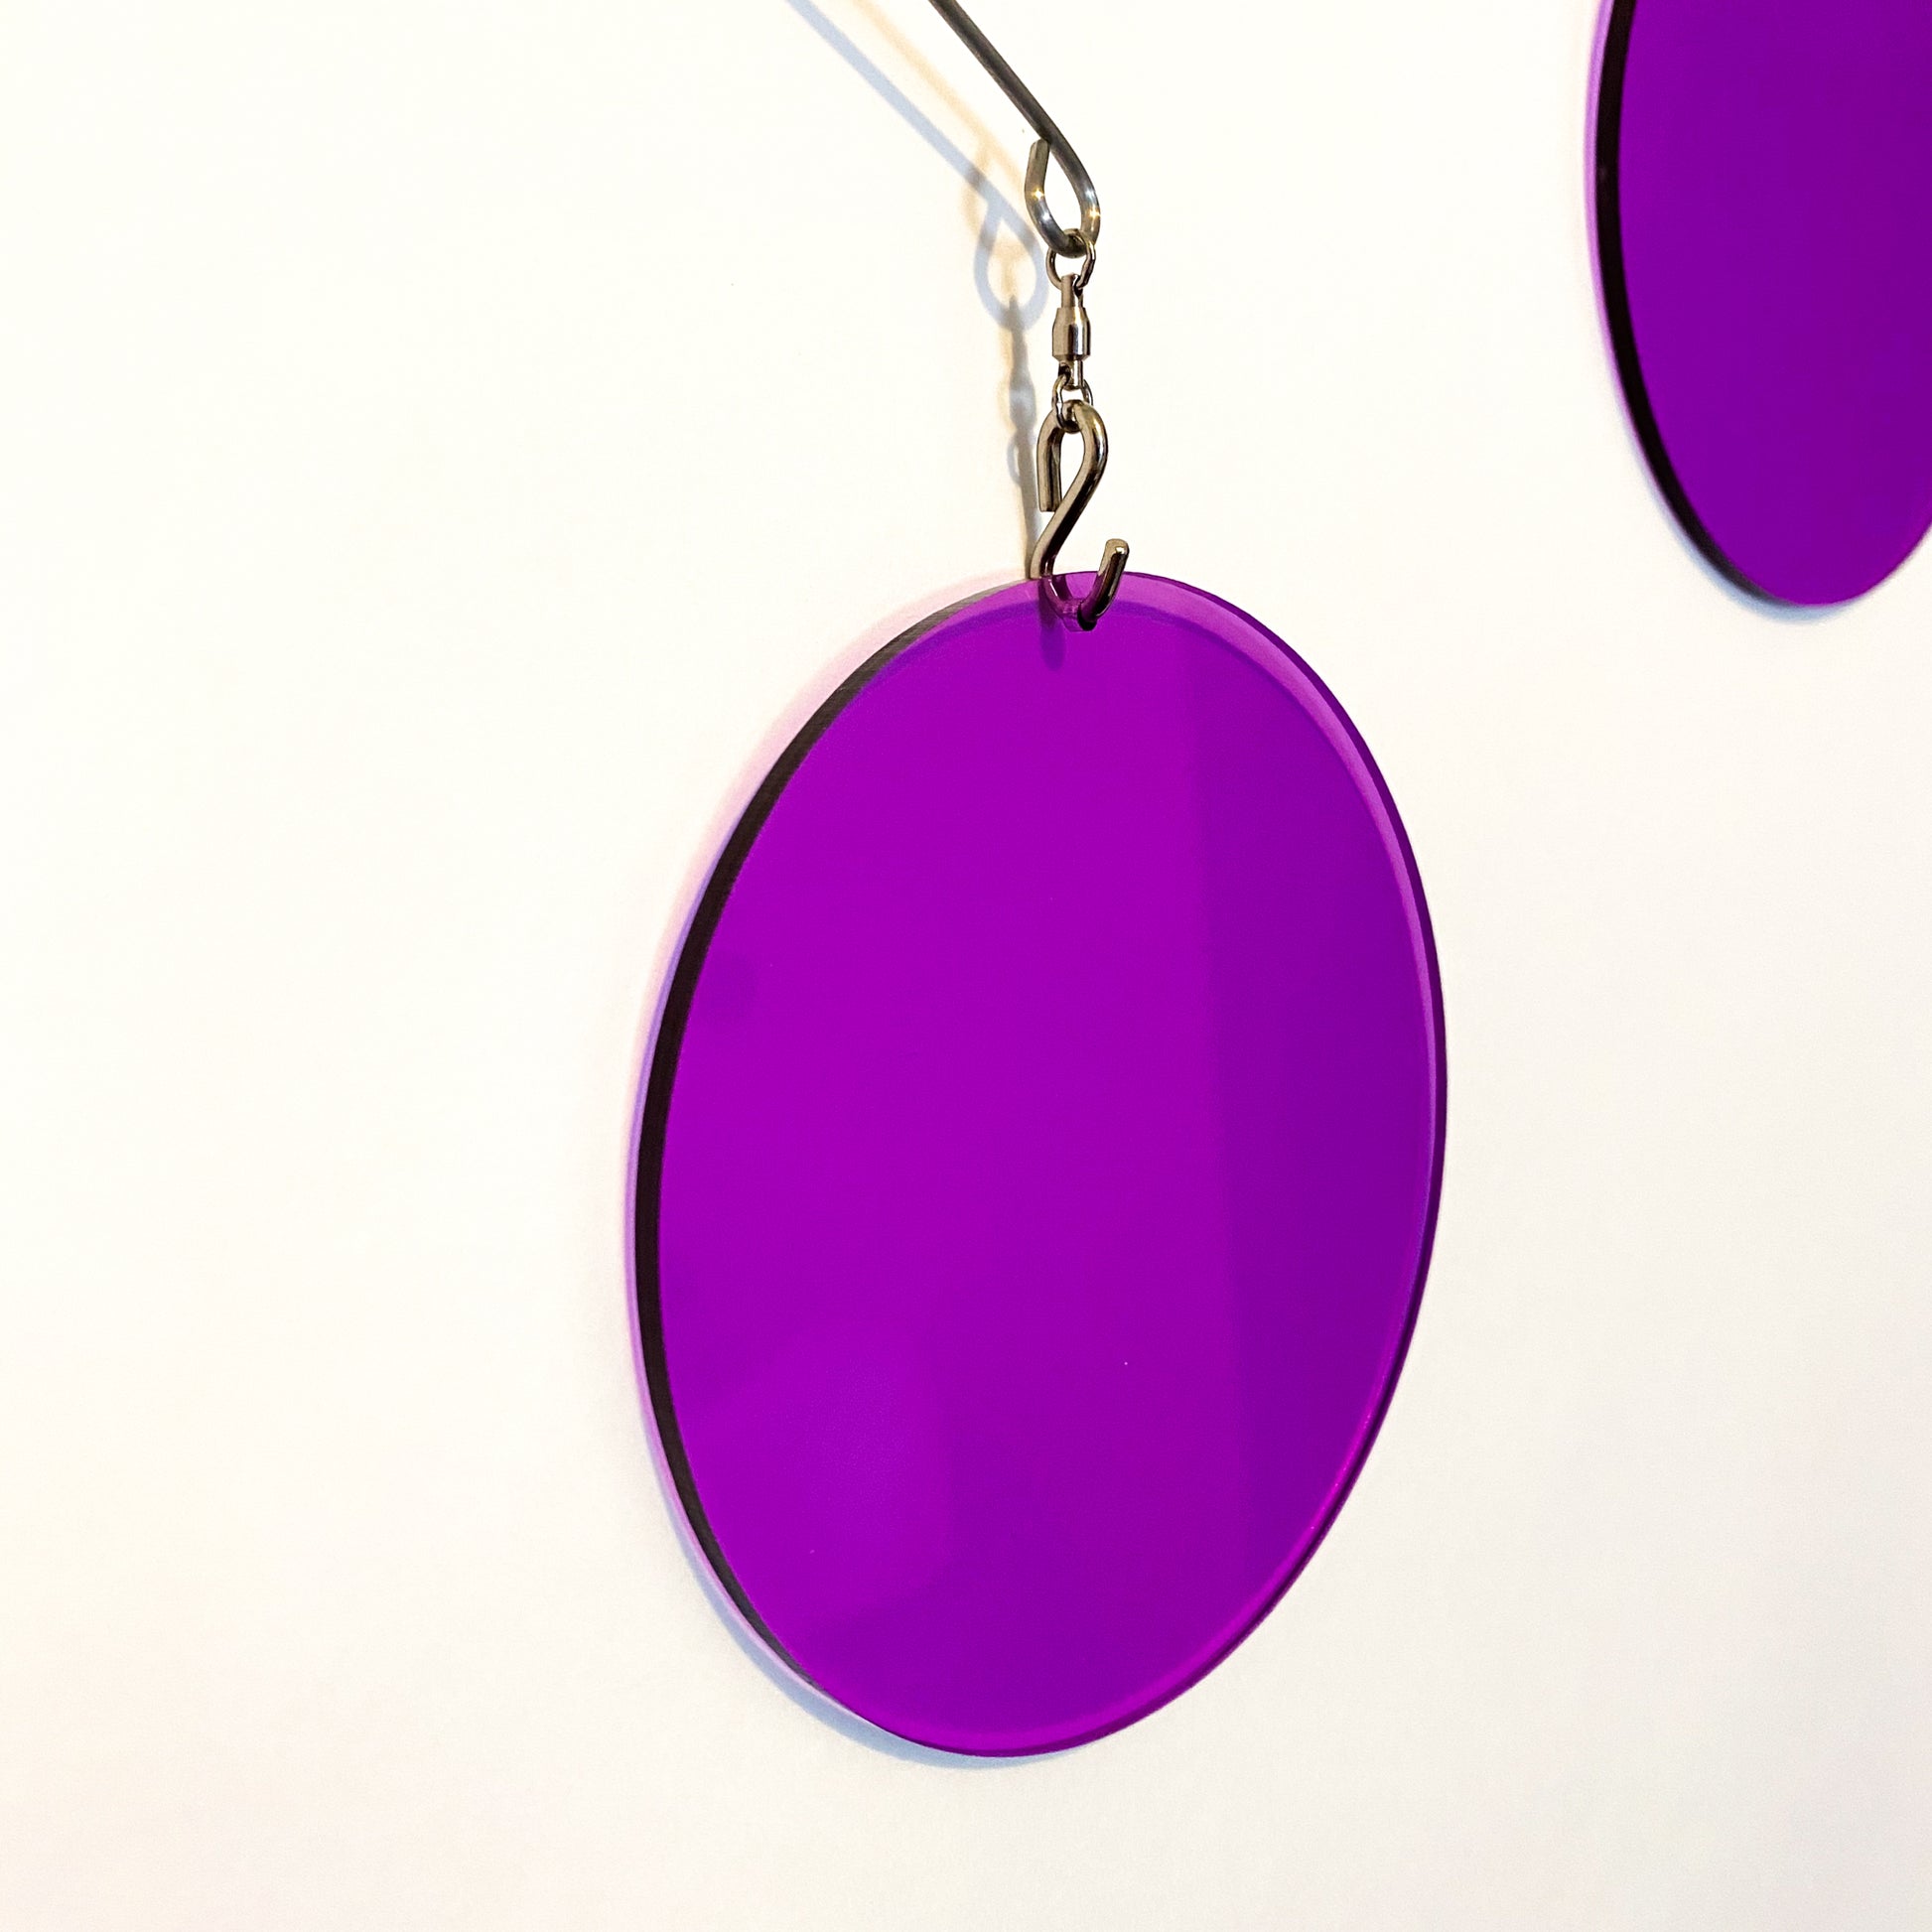 Closeup of Clear Purple Acrylic Atomic Mobile - kinetic hanging art mobiles for modern home decor by AtomicMobiles.com